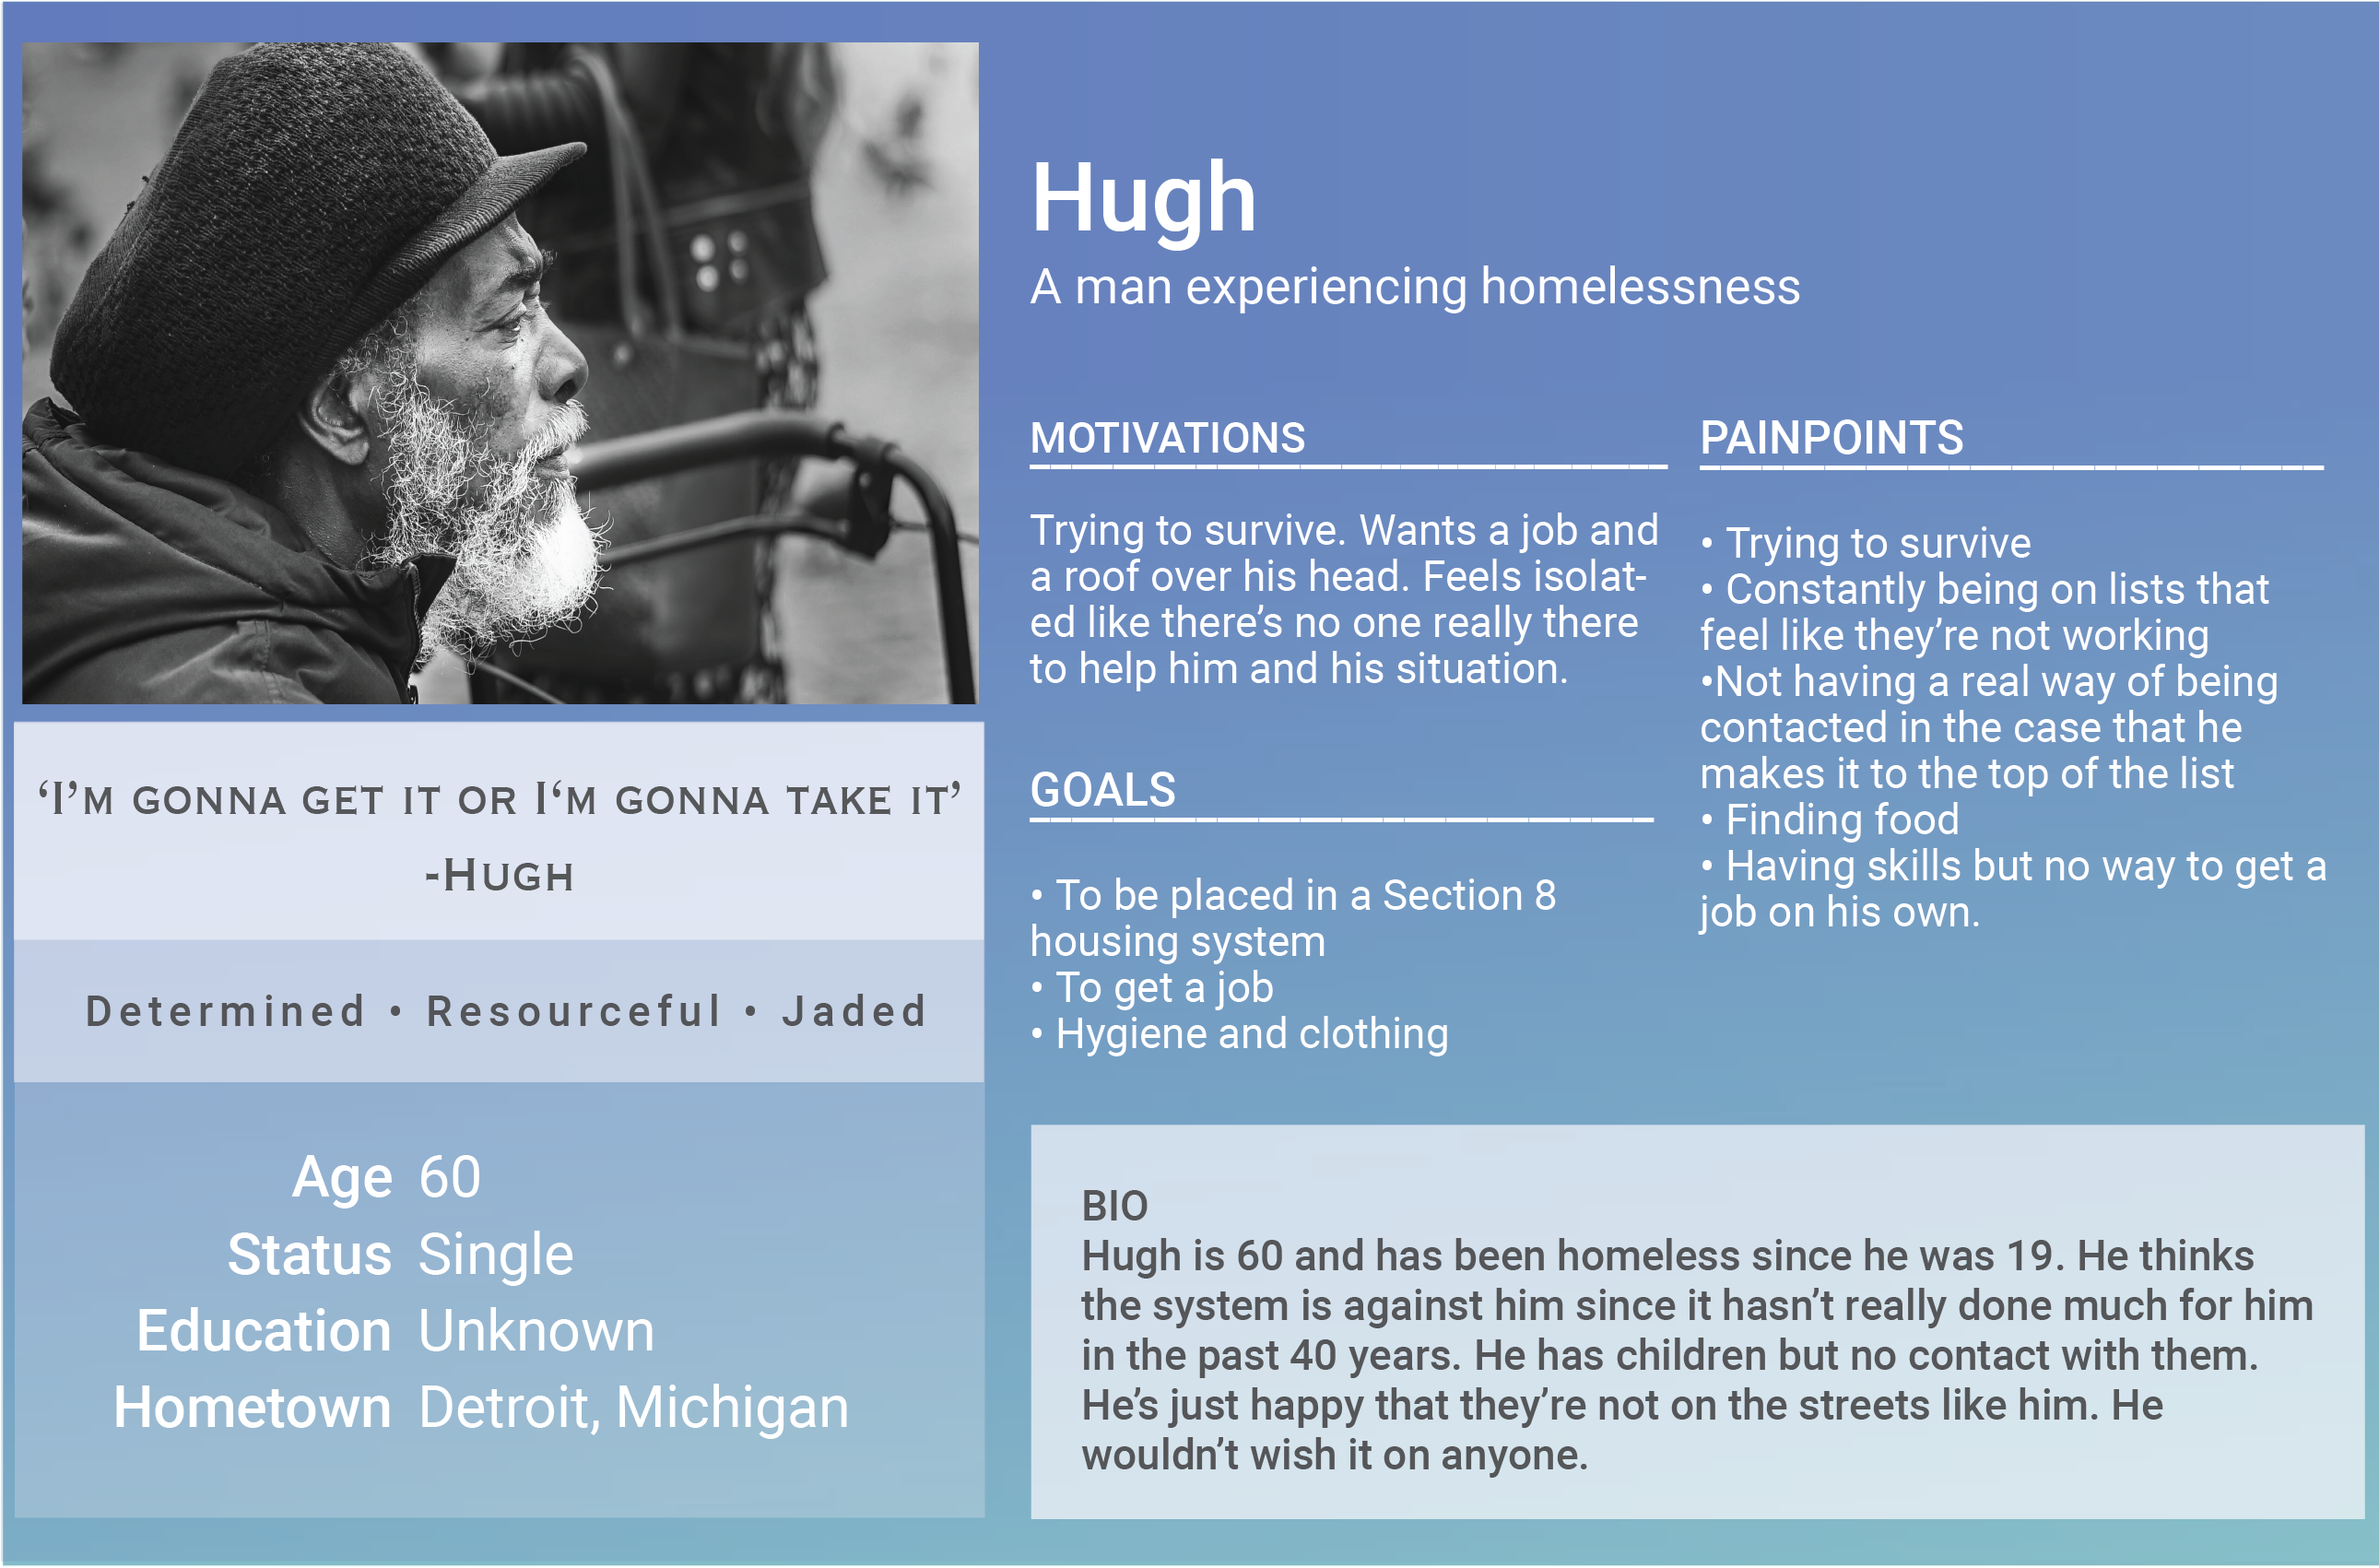 User Persona showcasing Hugh. Hugh is 60 years old and has been homeless since he was 19. He believes the system is against him, and there's no one to help him in his situation. He's motivated to get out of homelessness. To do this, he has goals of finding housing and a job. His current painpoints are being on a bunch of waiting lists and having skills but having no success in getting a job.